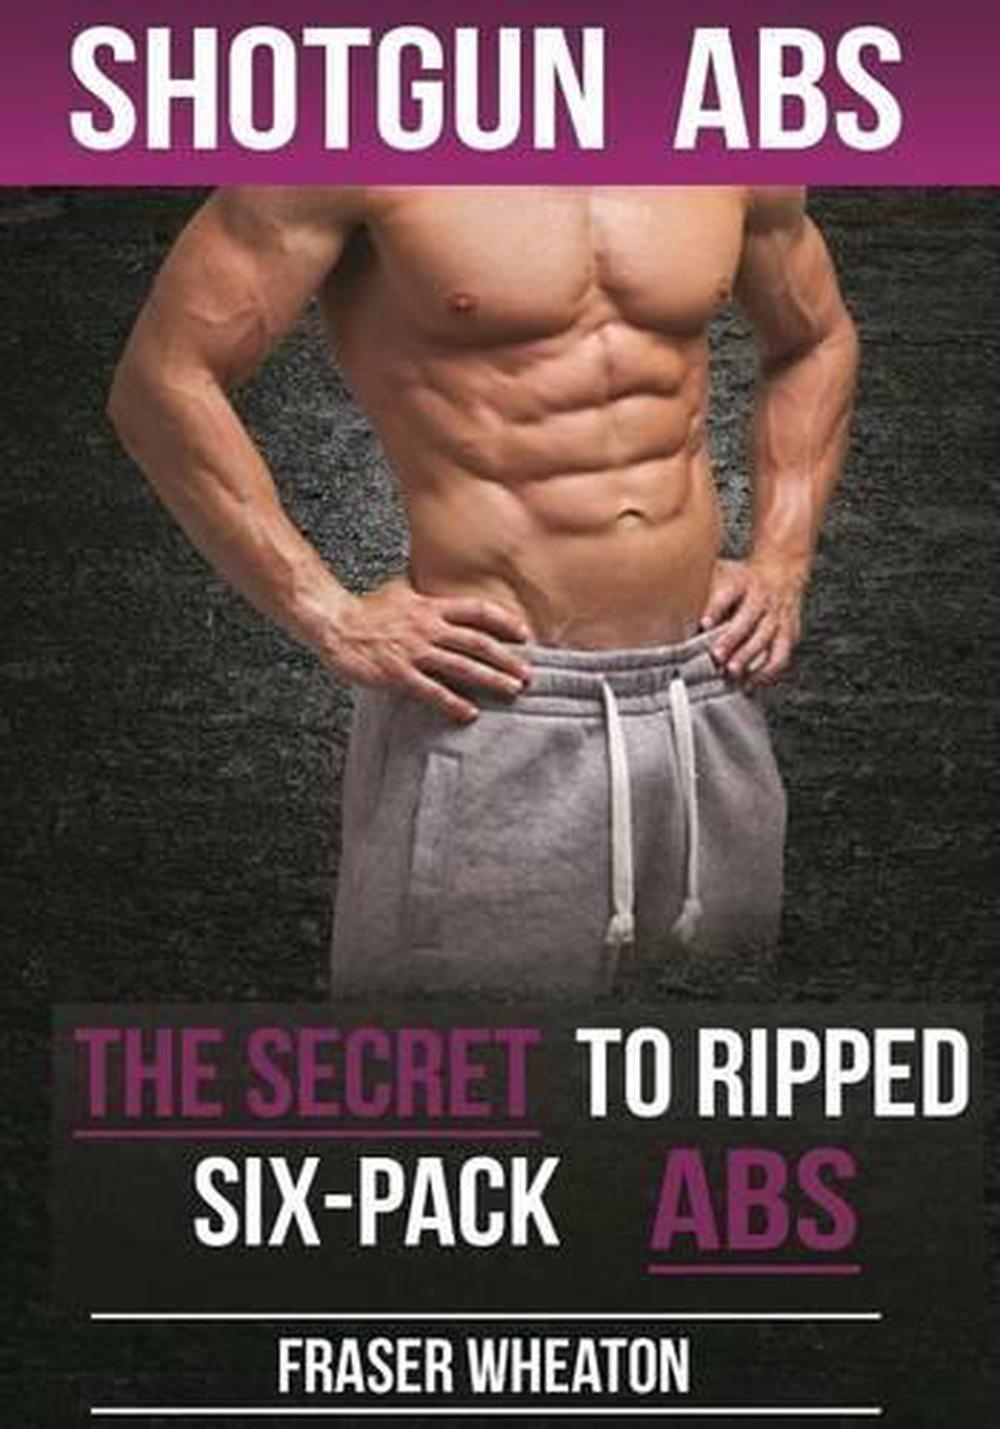 Shotgun Abs The Secret To Ripped Six Pack Abs By Fraser Wheaton English Paper Ebay